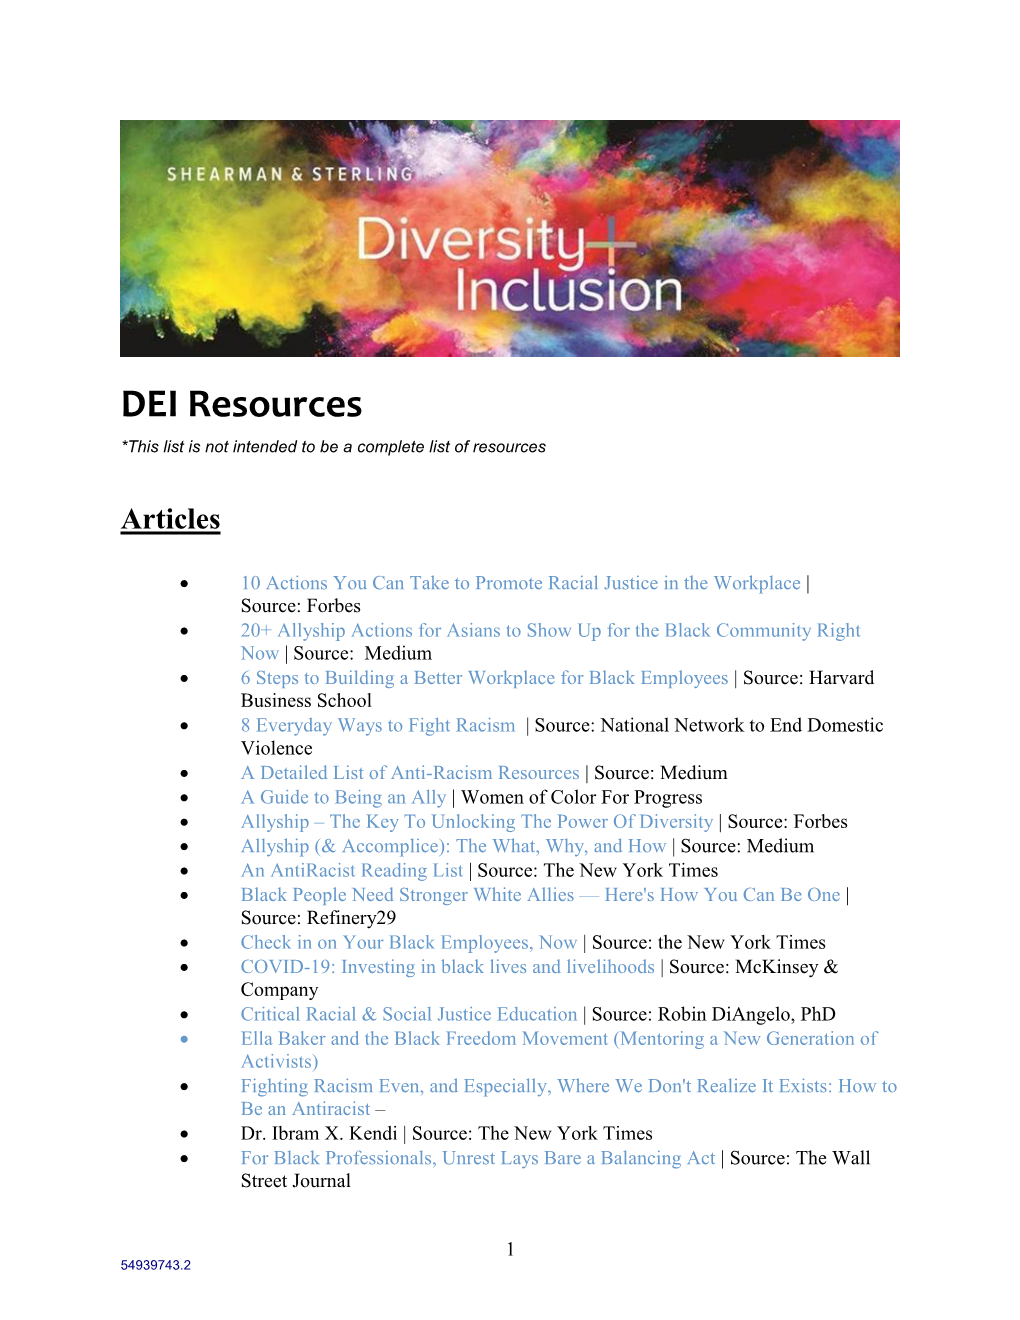 DEI Resources *This List Is Not Intended to Be a Complete List of Resources